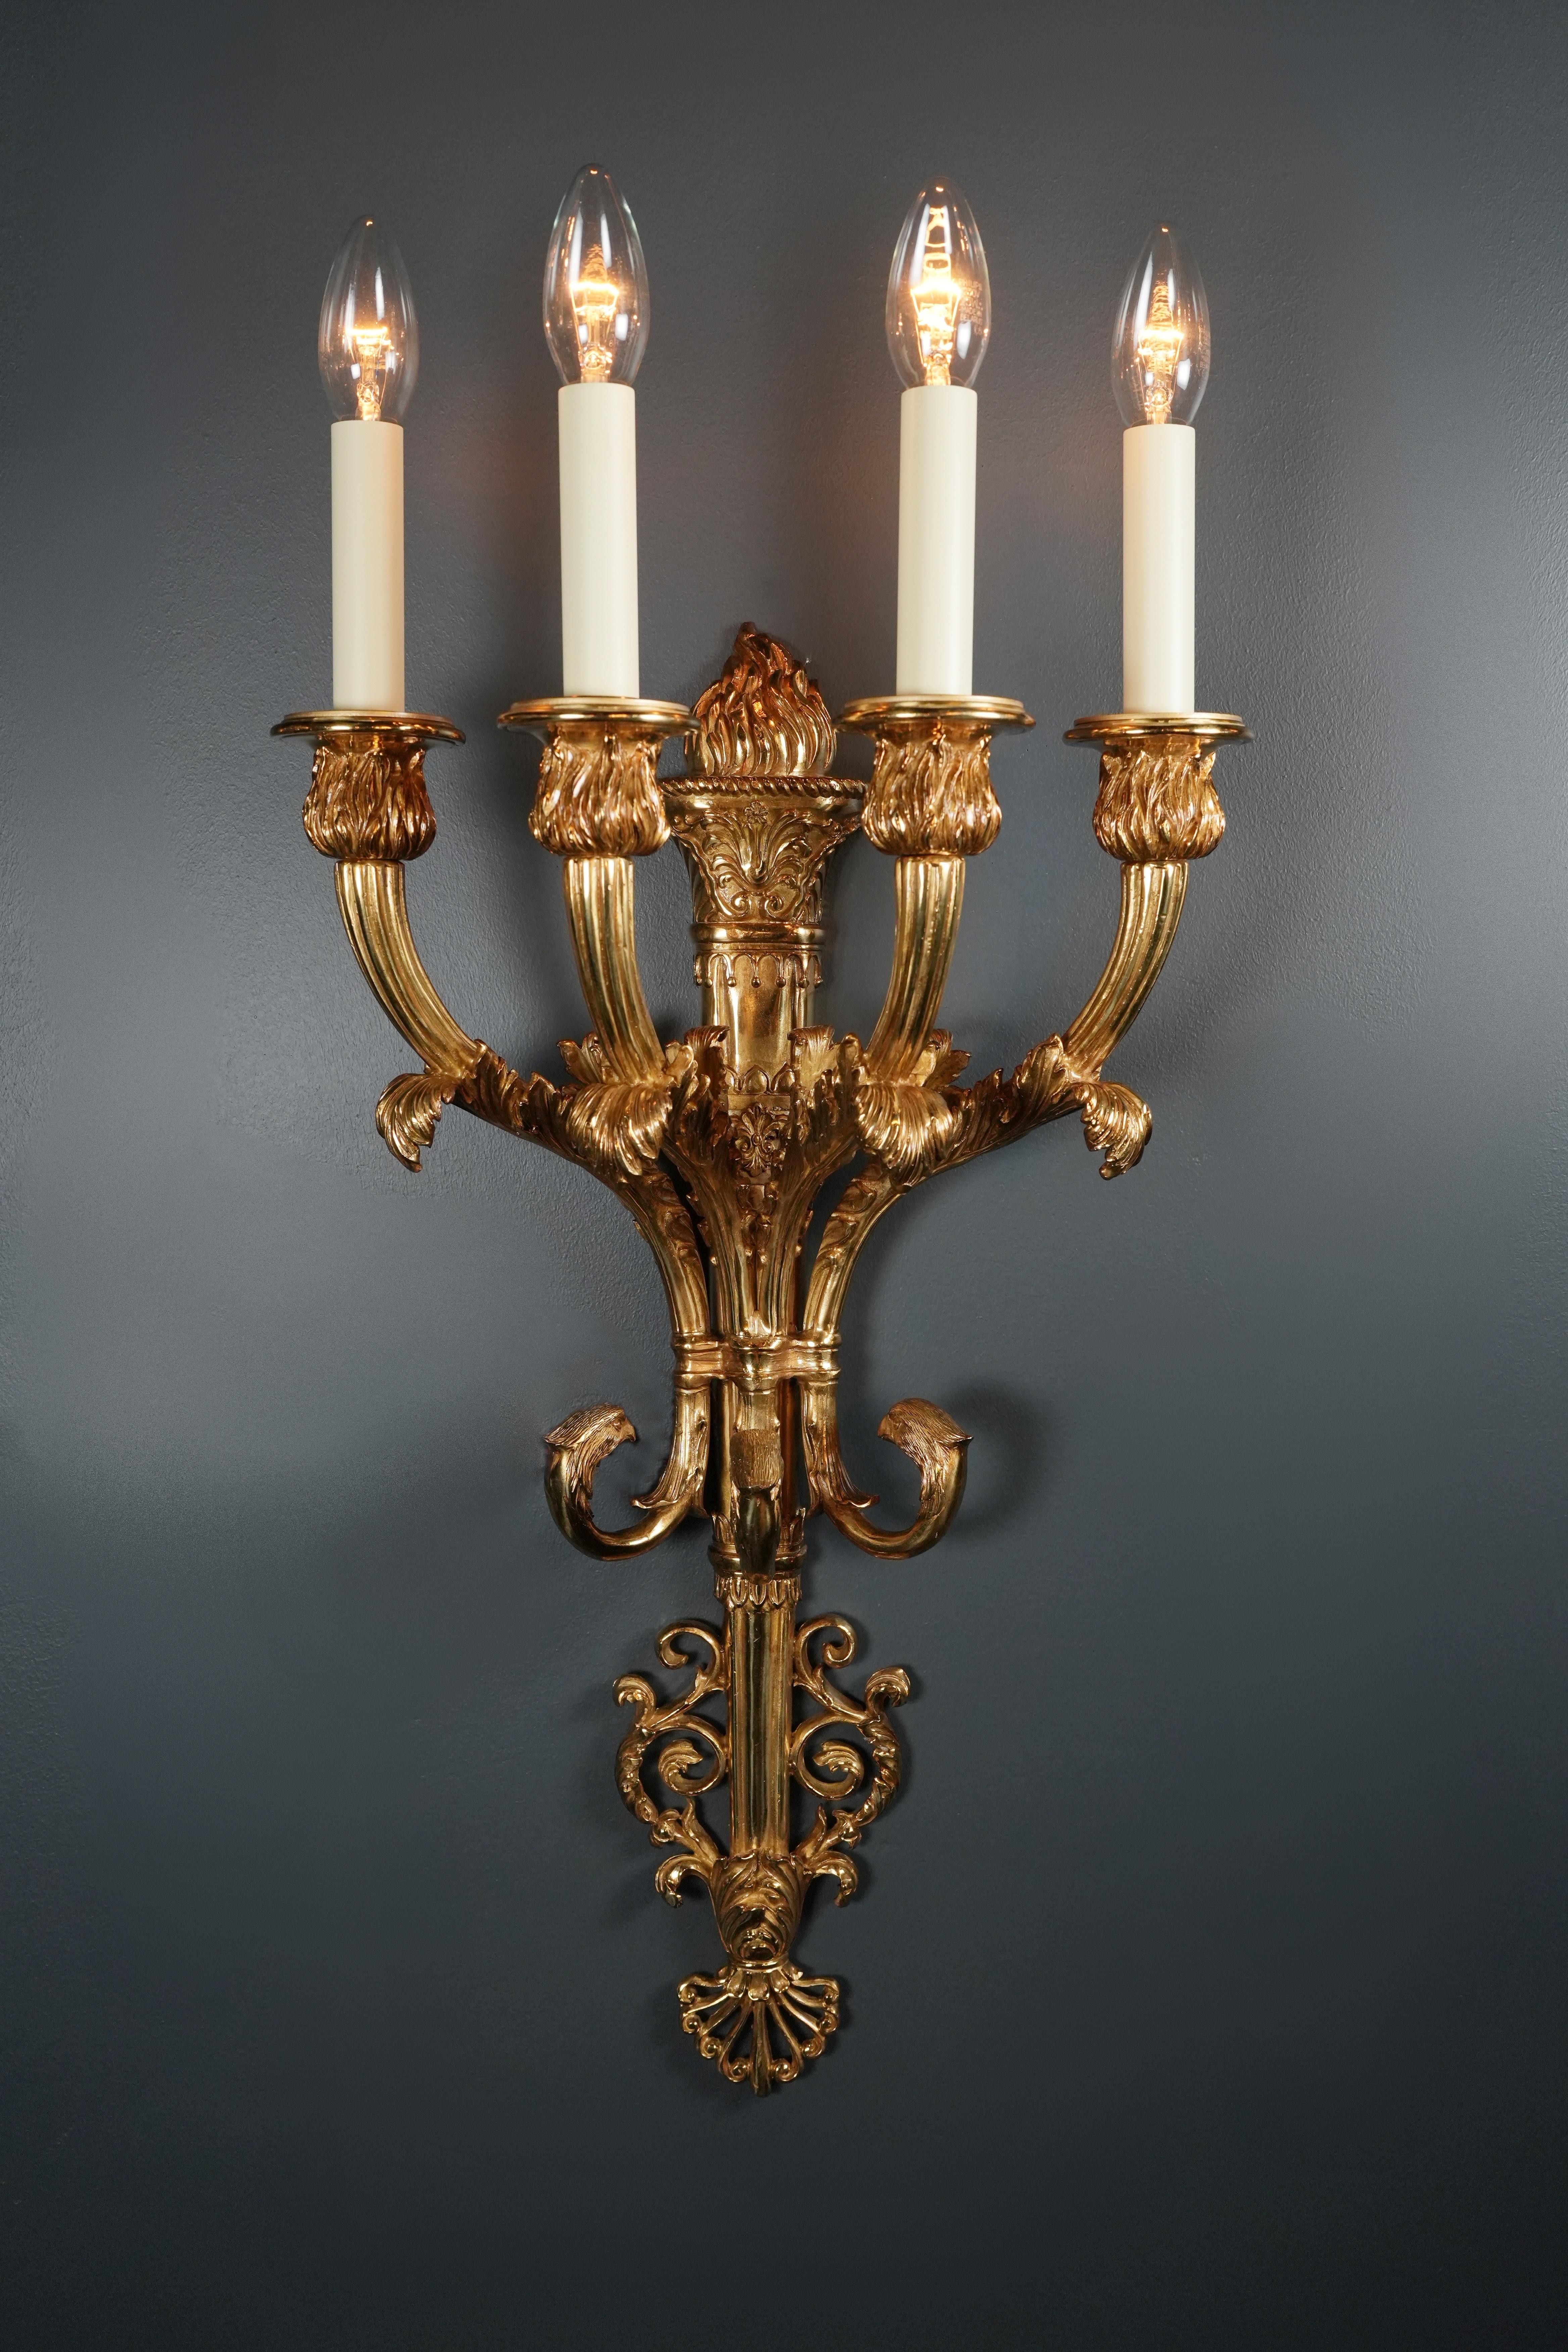 Immerse yourself in the elegance of bygone times with our exclusive antique-style brass wall lamp. This wall lamp is not only a stunning lighting object, but also a real work of art that brings the beauty of the ancient into the modern.

With a